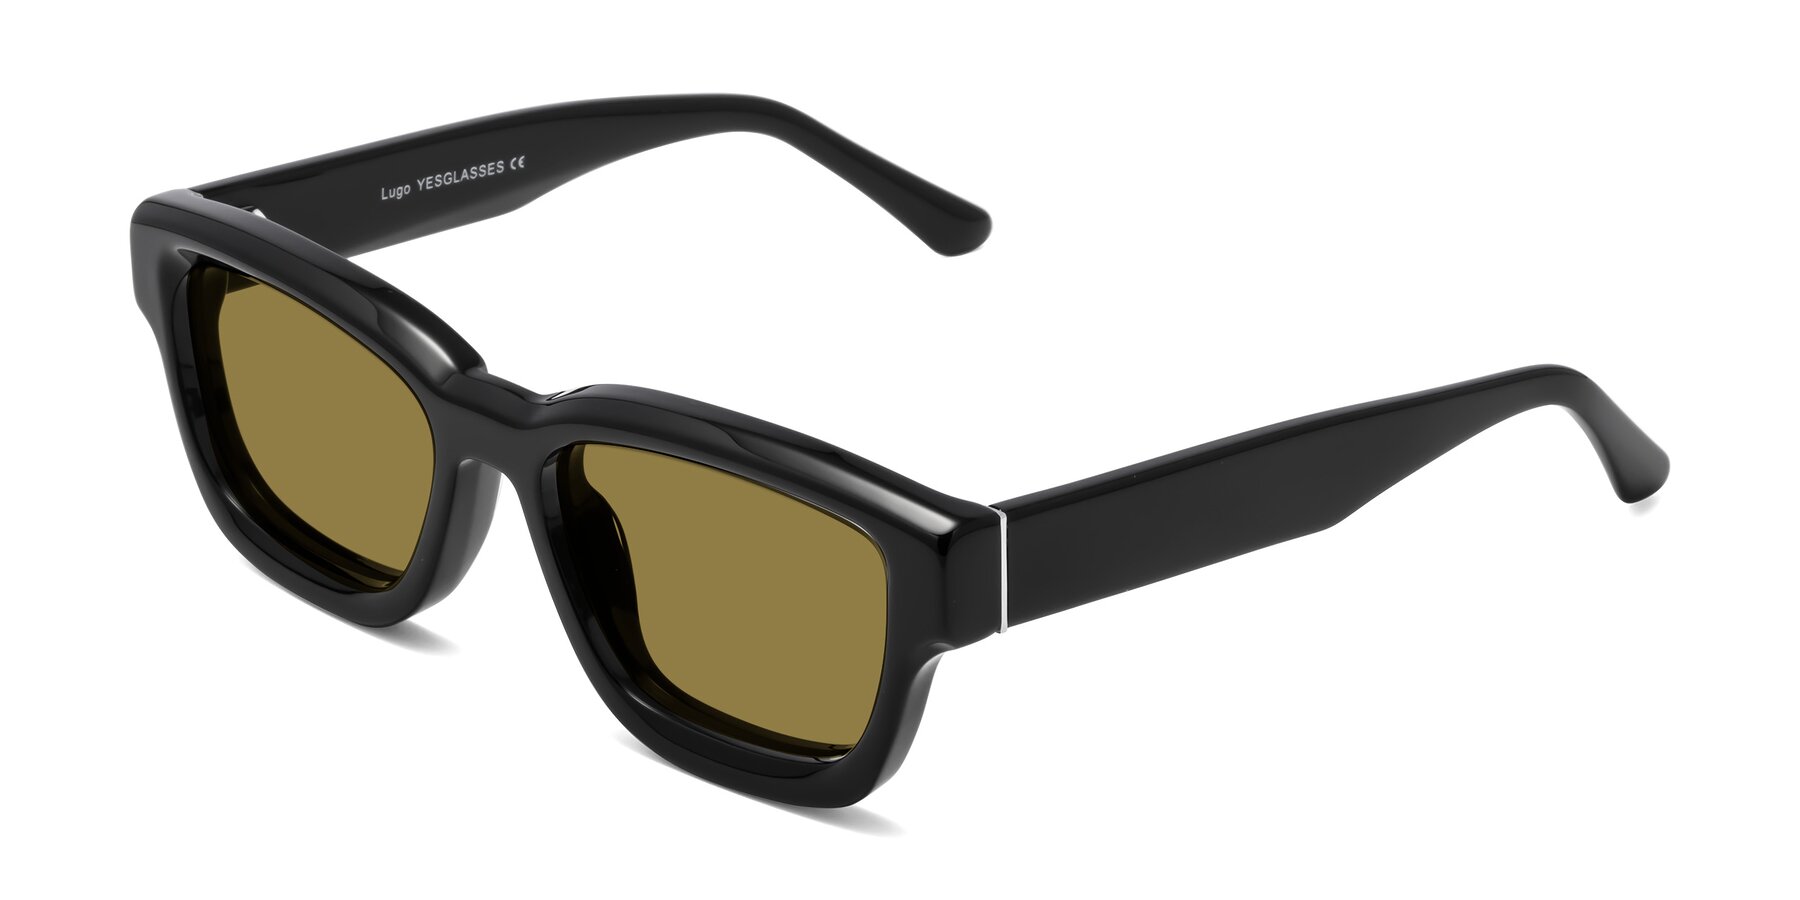 Angle of Lugo in Black with Brown Polarized Lenses